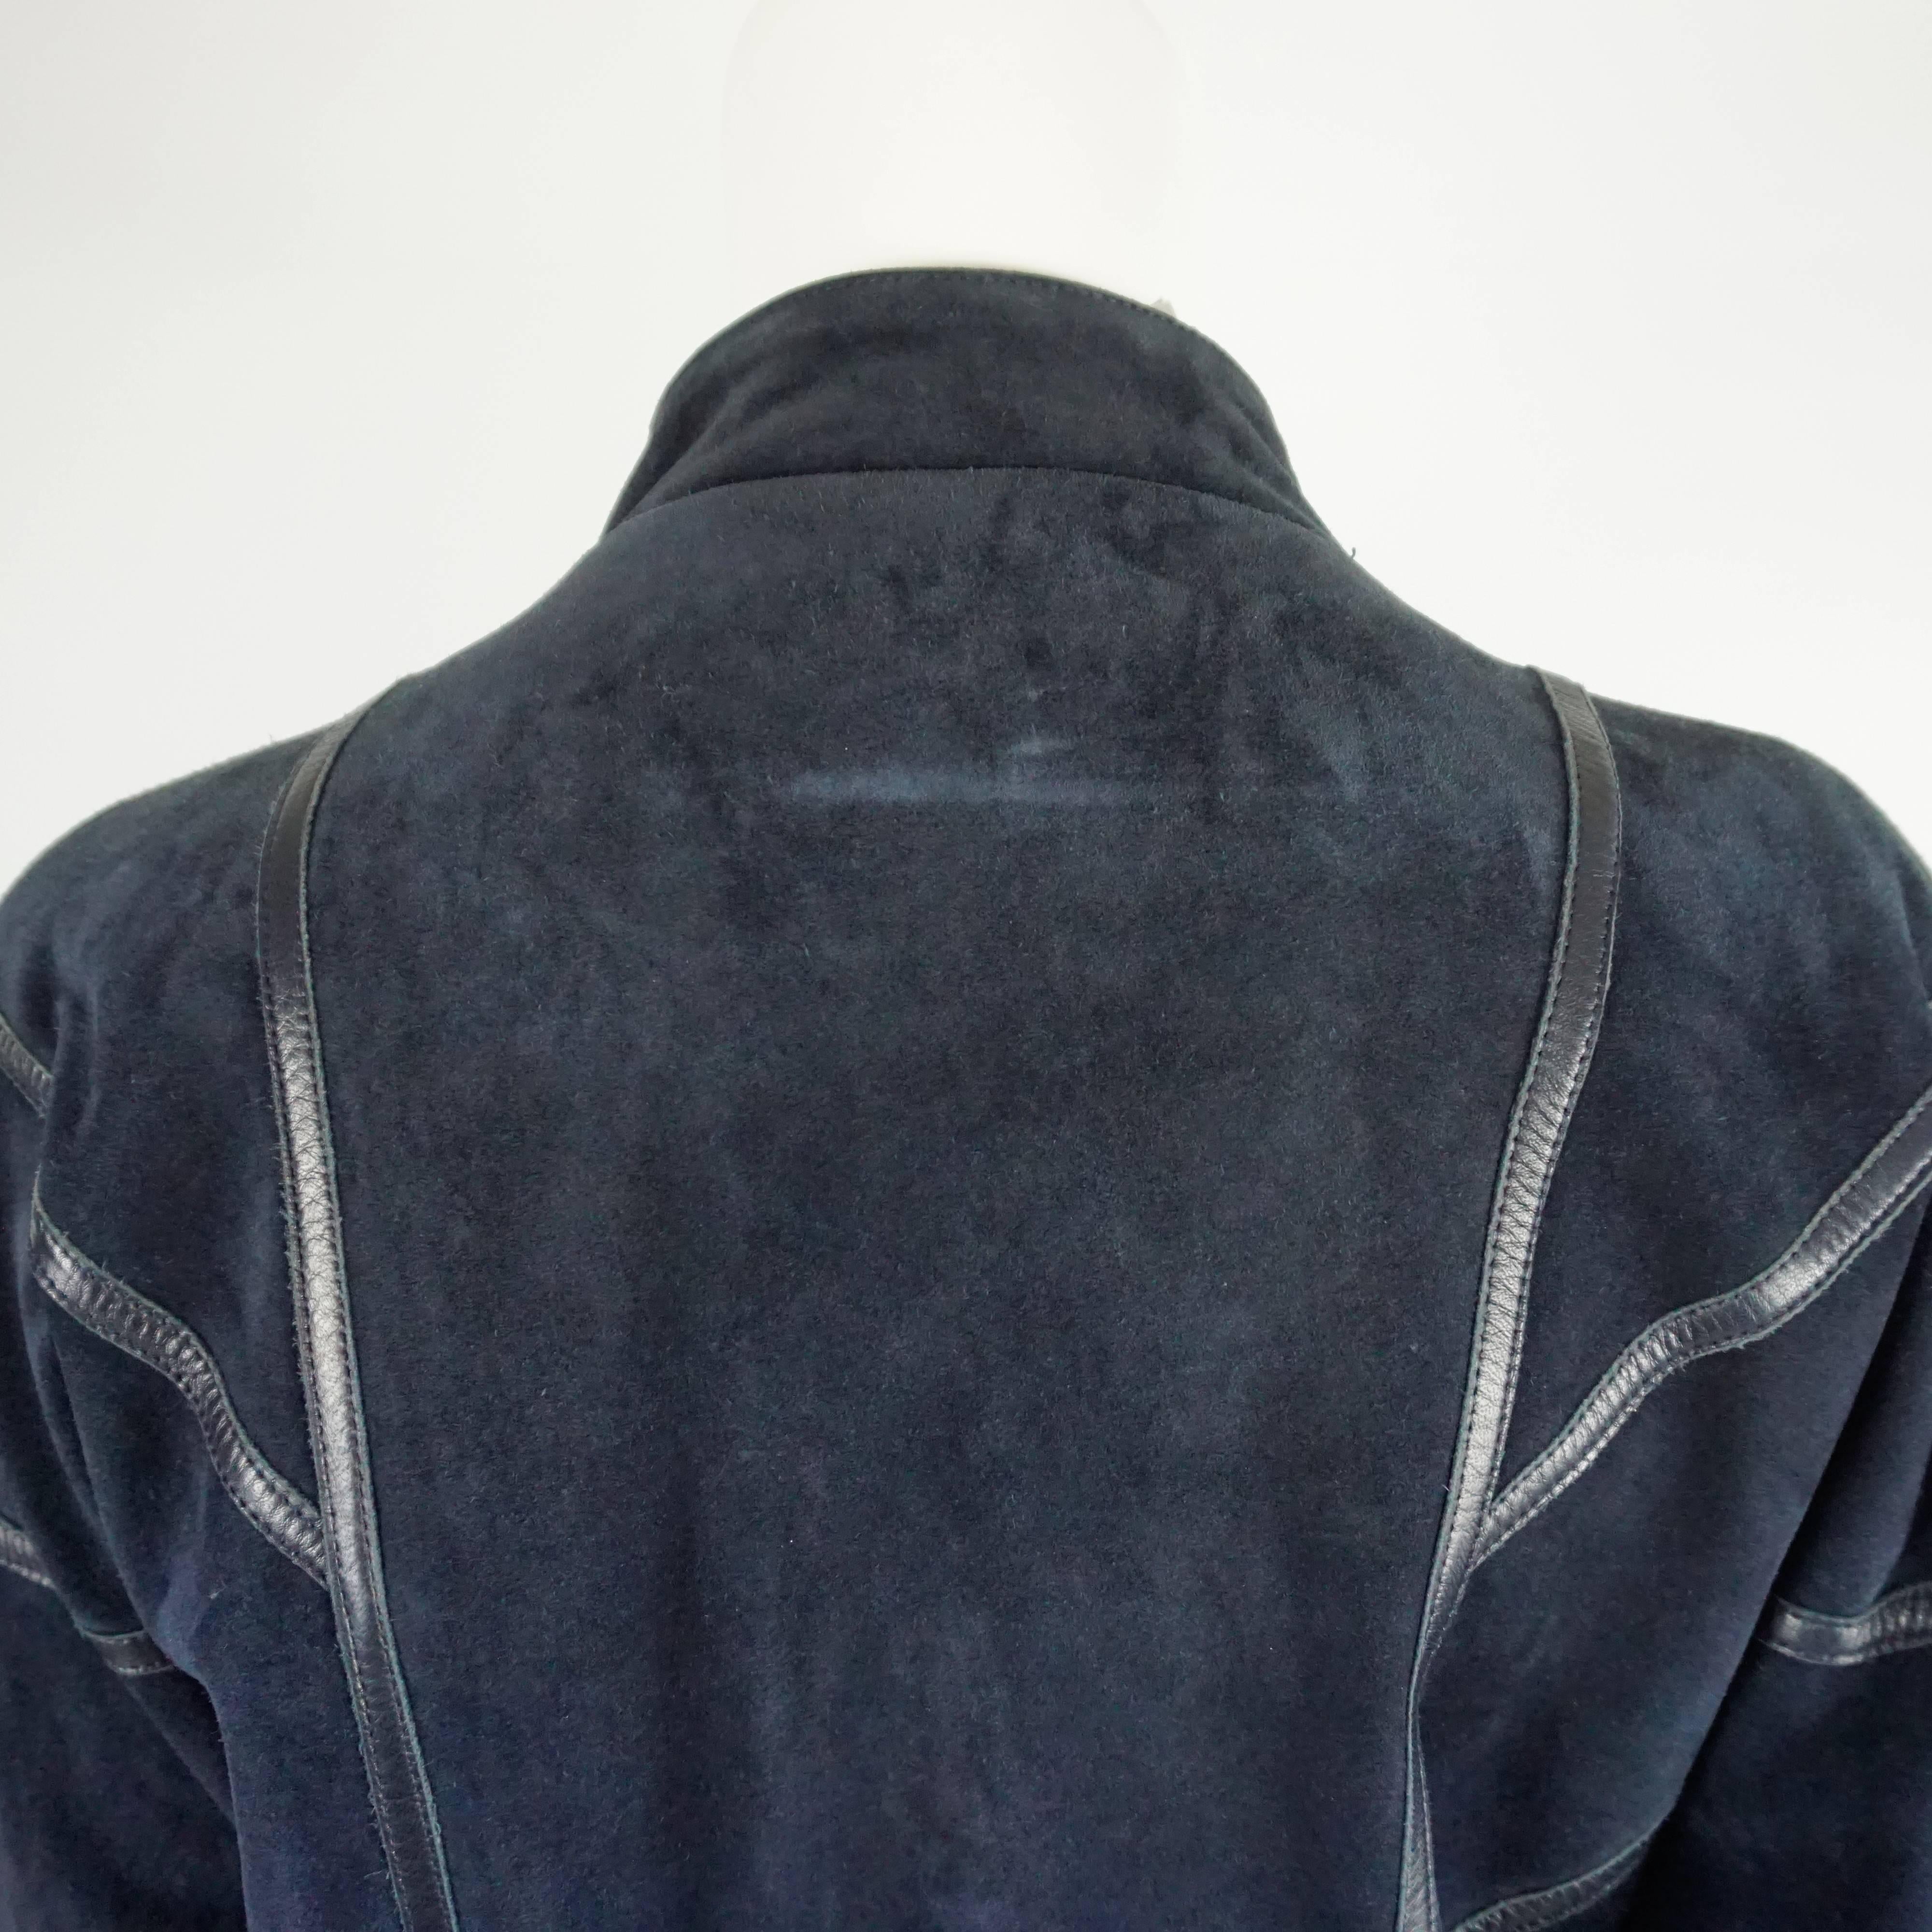 Celine Navy Suede and Leather Oversize Jacket - 42 - 1980s 3